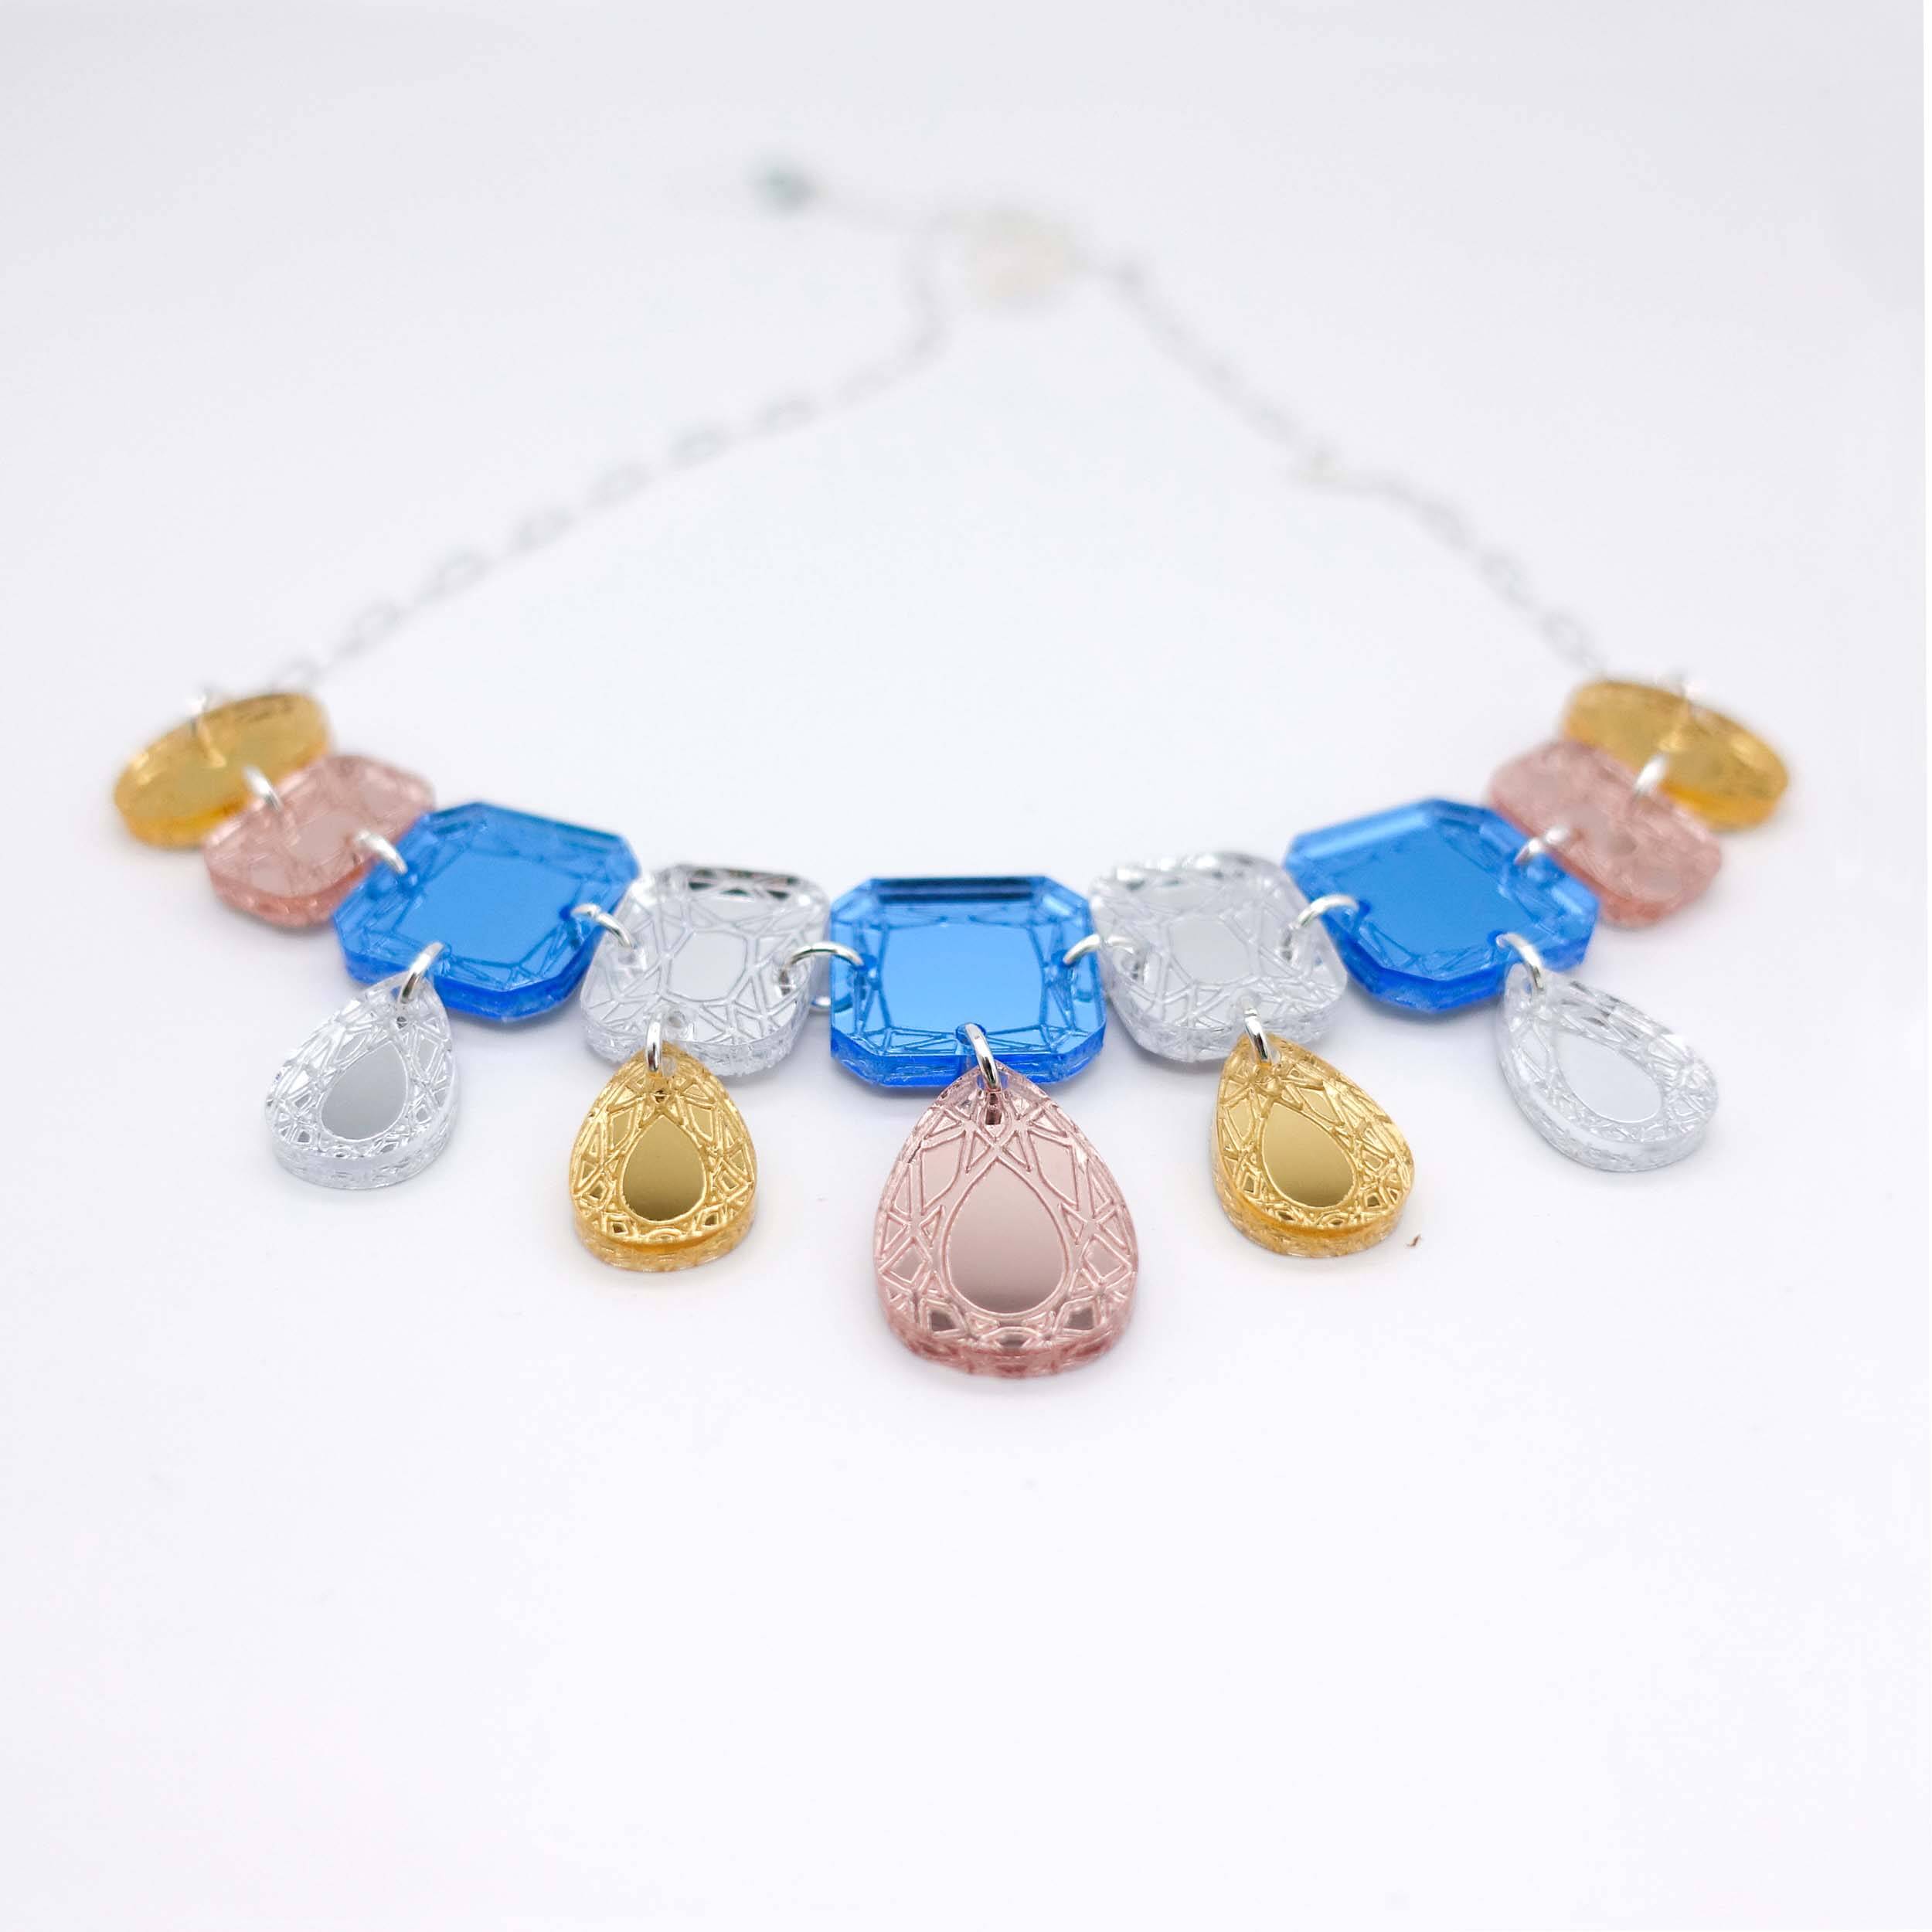 Austerity jewels necklace in soft blue colours, designed by Sarah Day for Wear and Resist. £2 goes to Women for Refugee Women. Bling for Brexit Britain! Recession chic. 